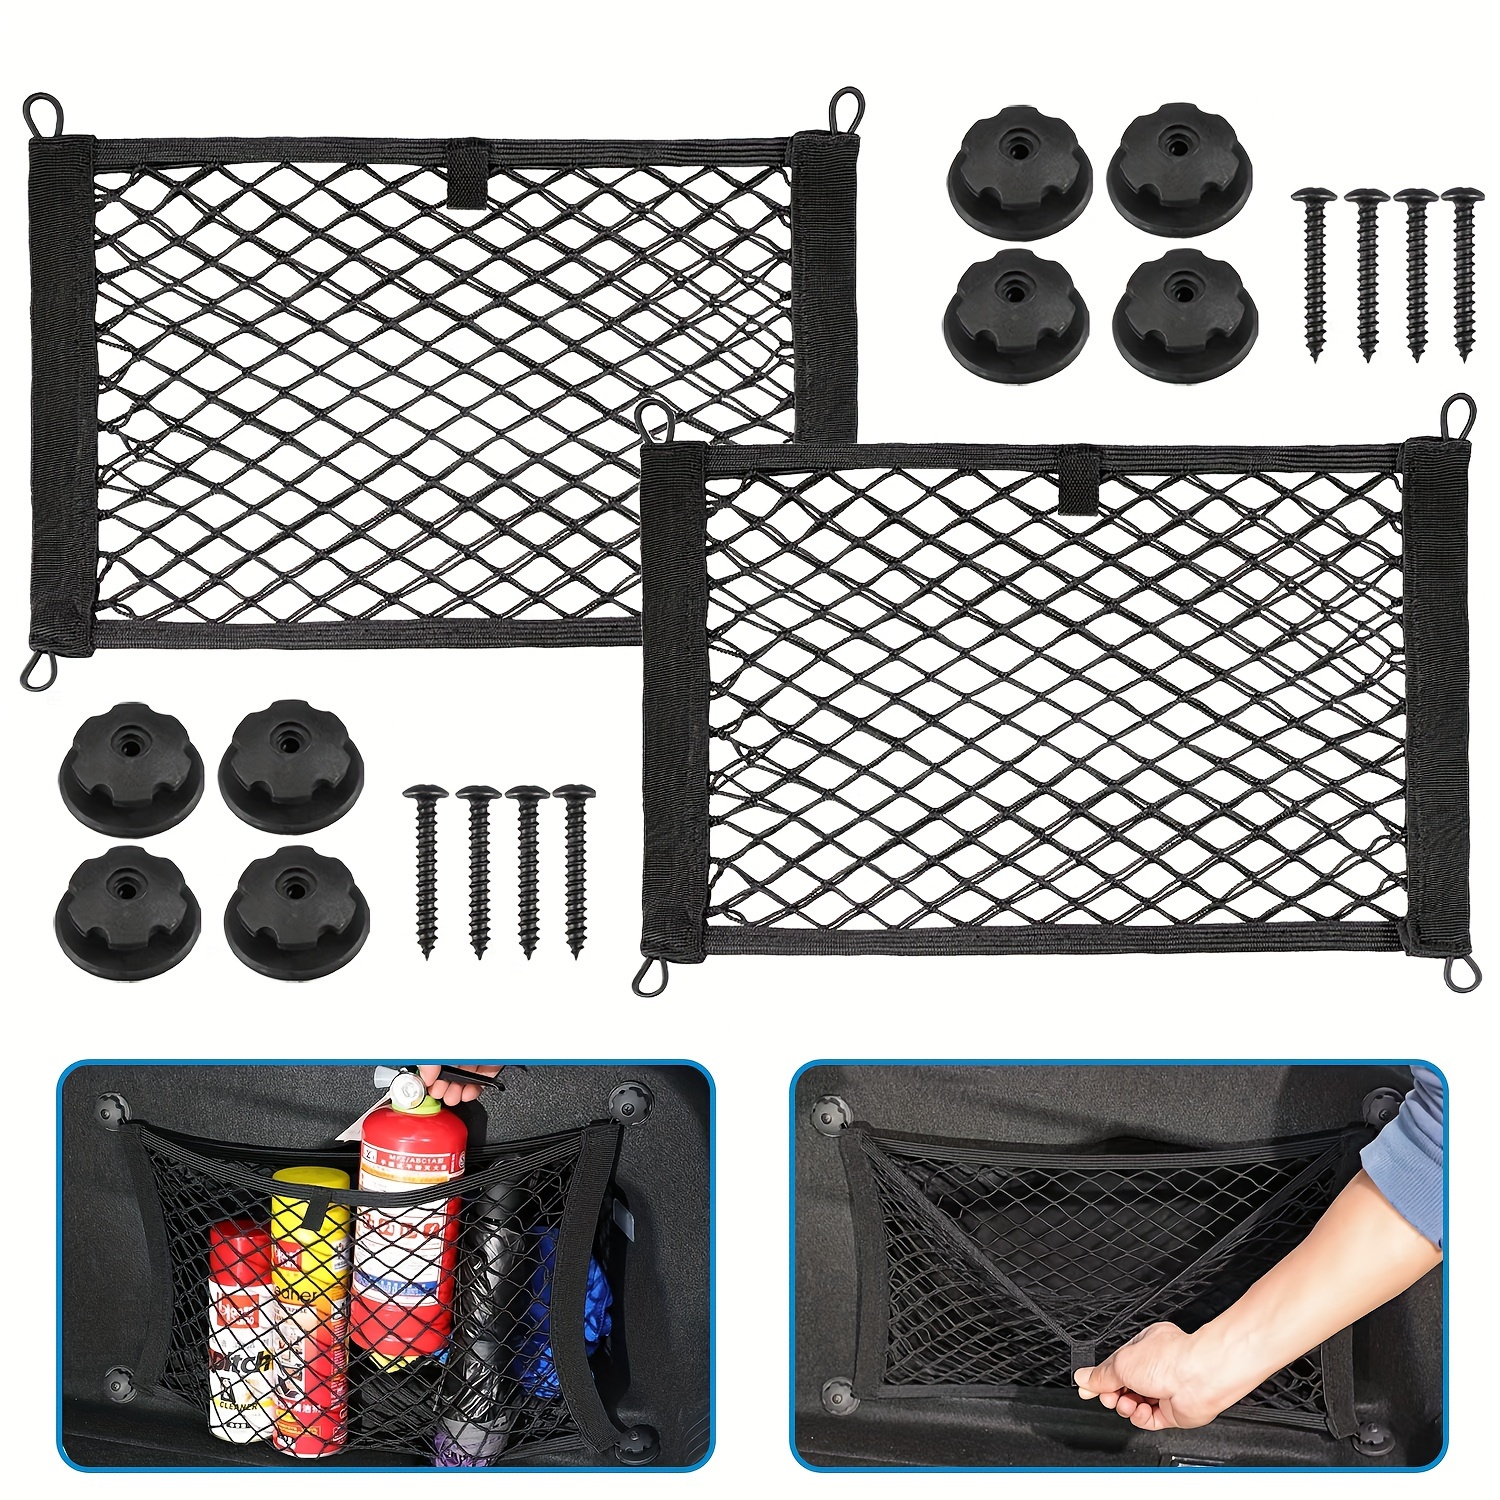 

Compact Elastic Cargo Nets For Vehicles - 2 Piece, Polyester Mesh With Hooks & Screws, Fits Cars, Rvs, Boats (17.7"x9.8")